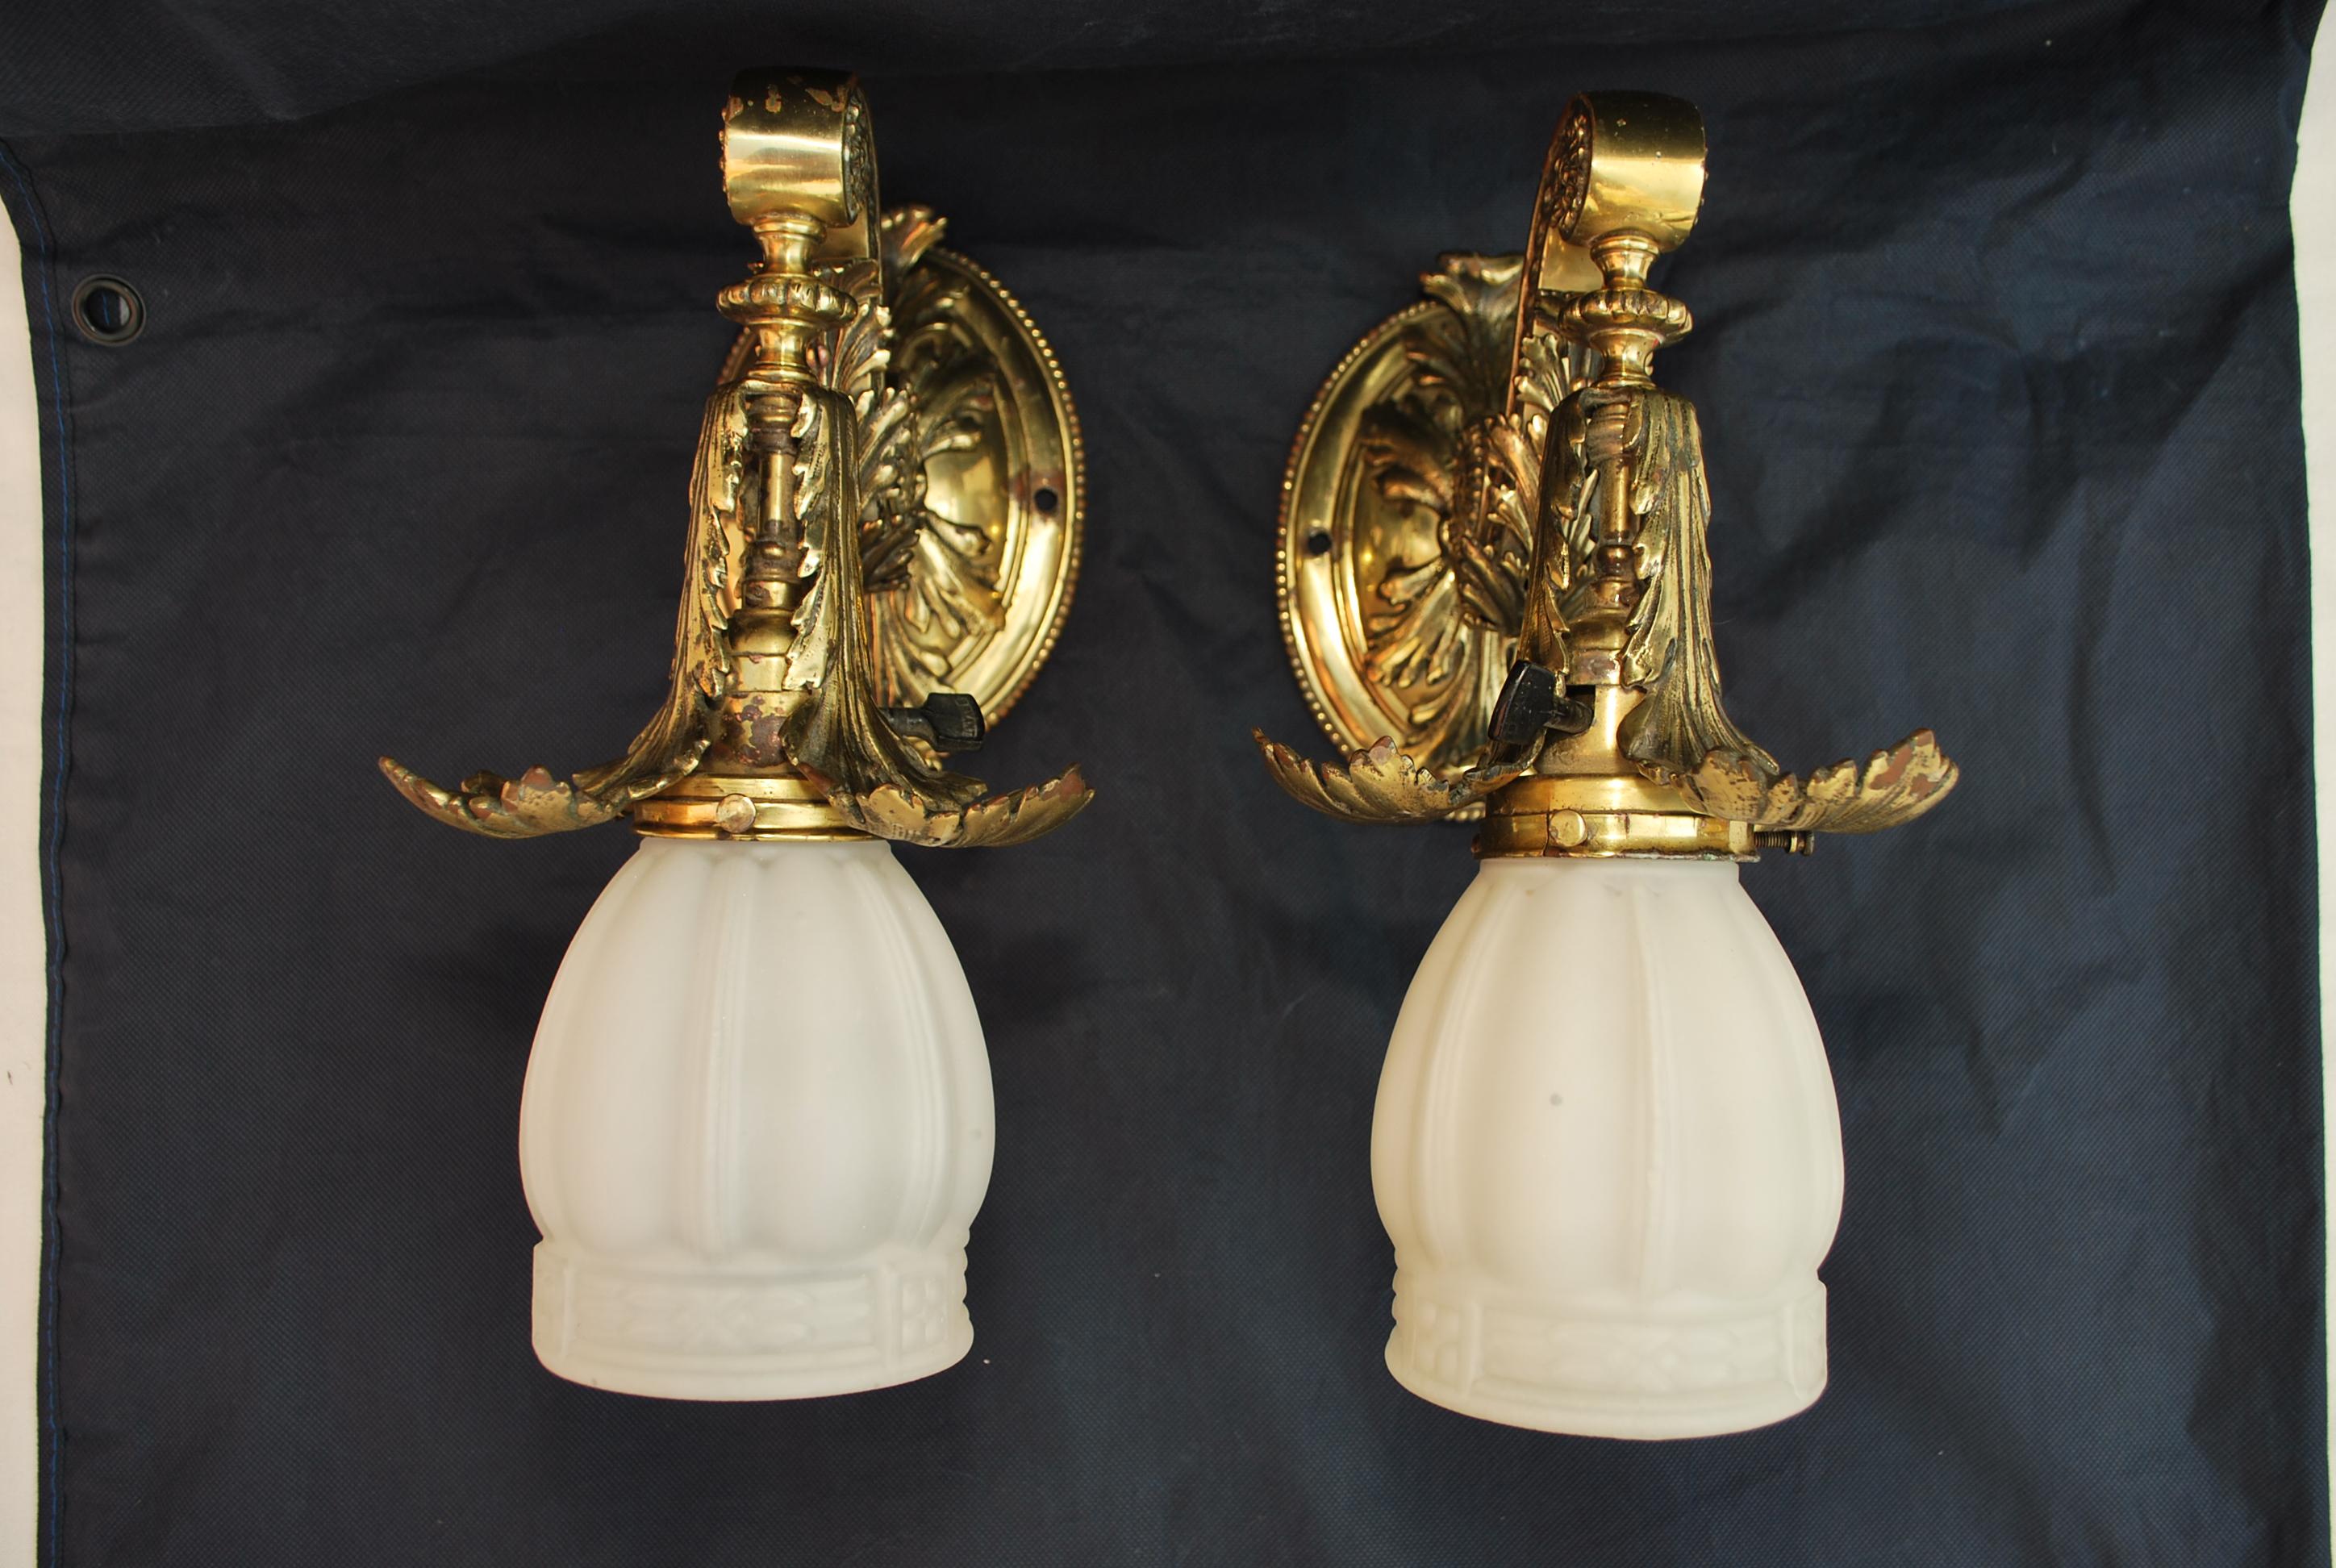 A beautiful and elegant pair of 1920's brass sconces, they are quite heavy, the quality is there, the patina is so nicer in person